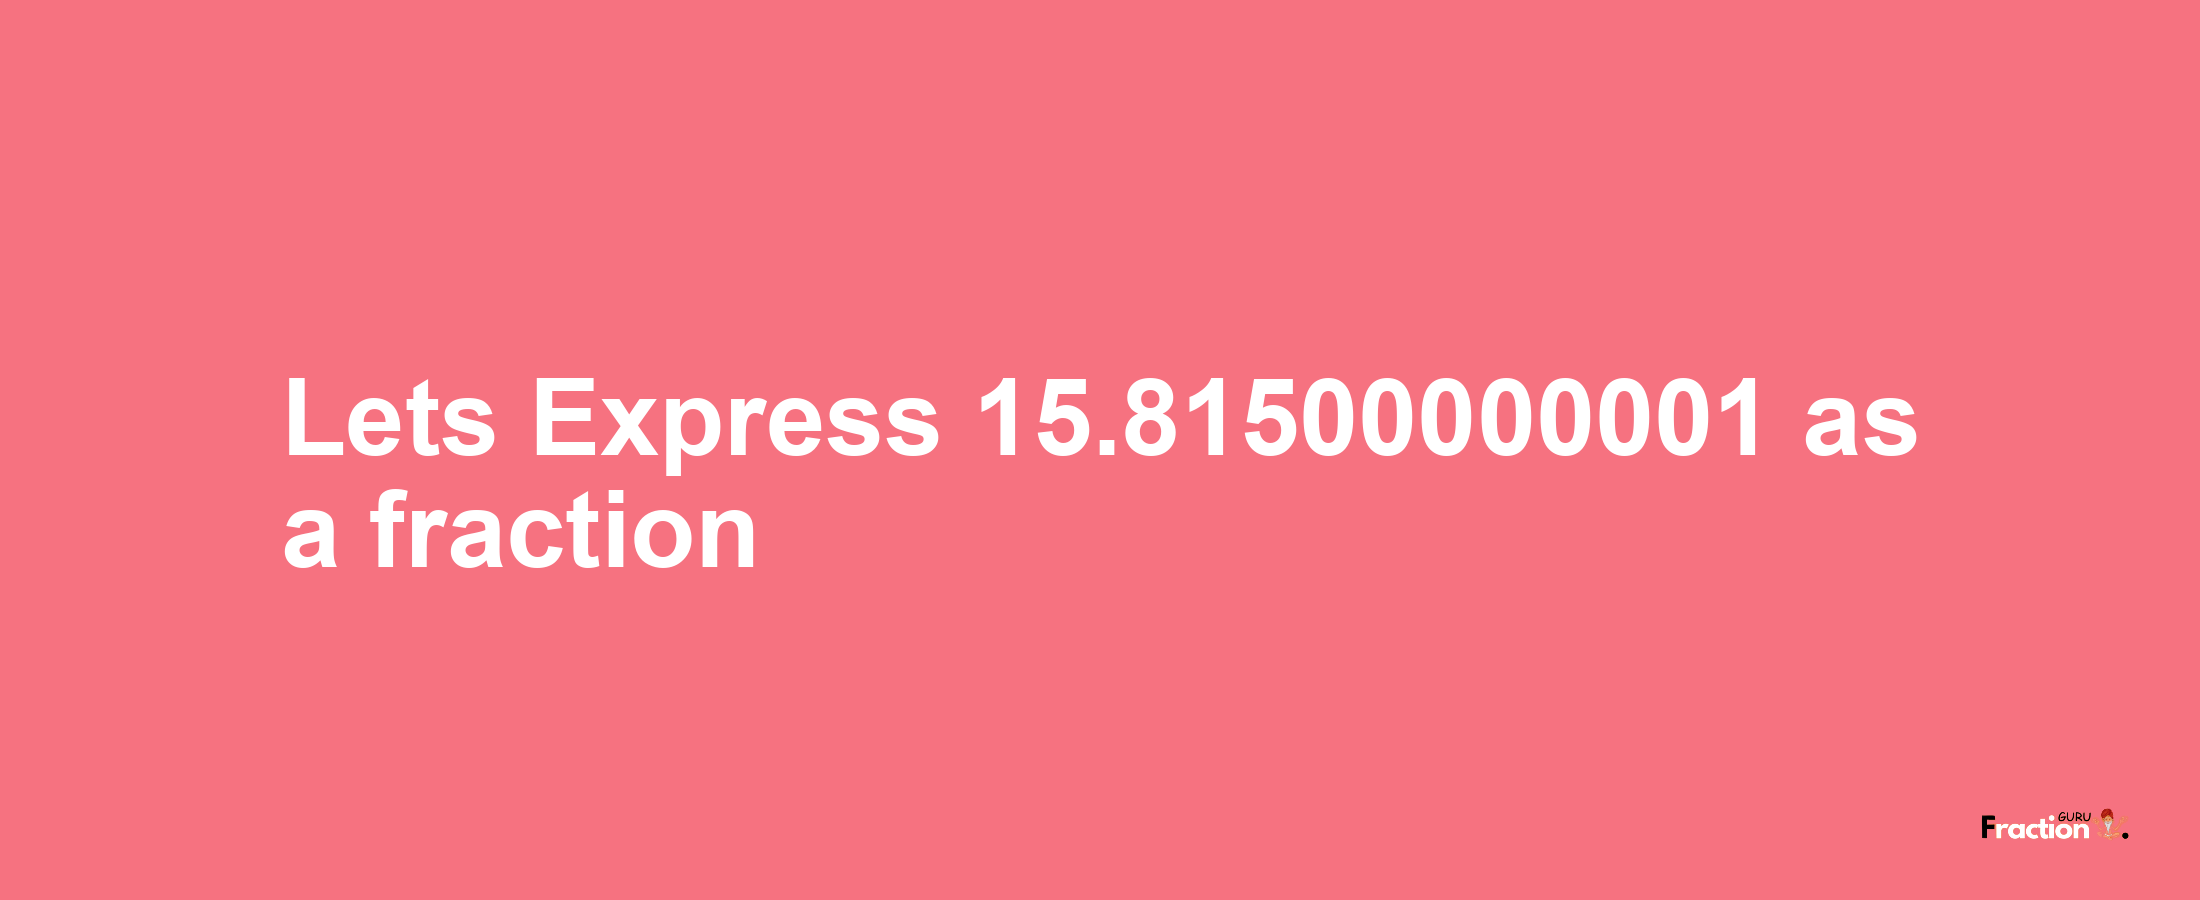 Lets Express 15.81500000001 as afraction